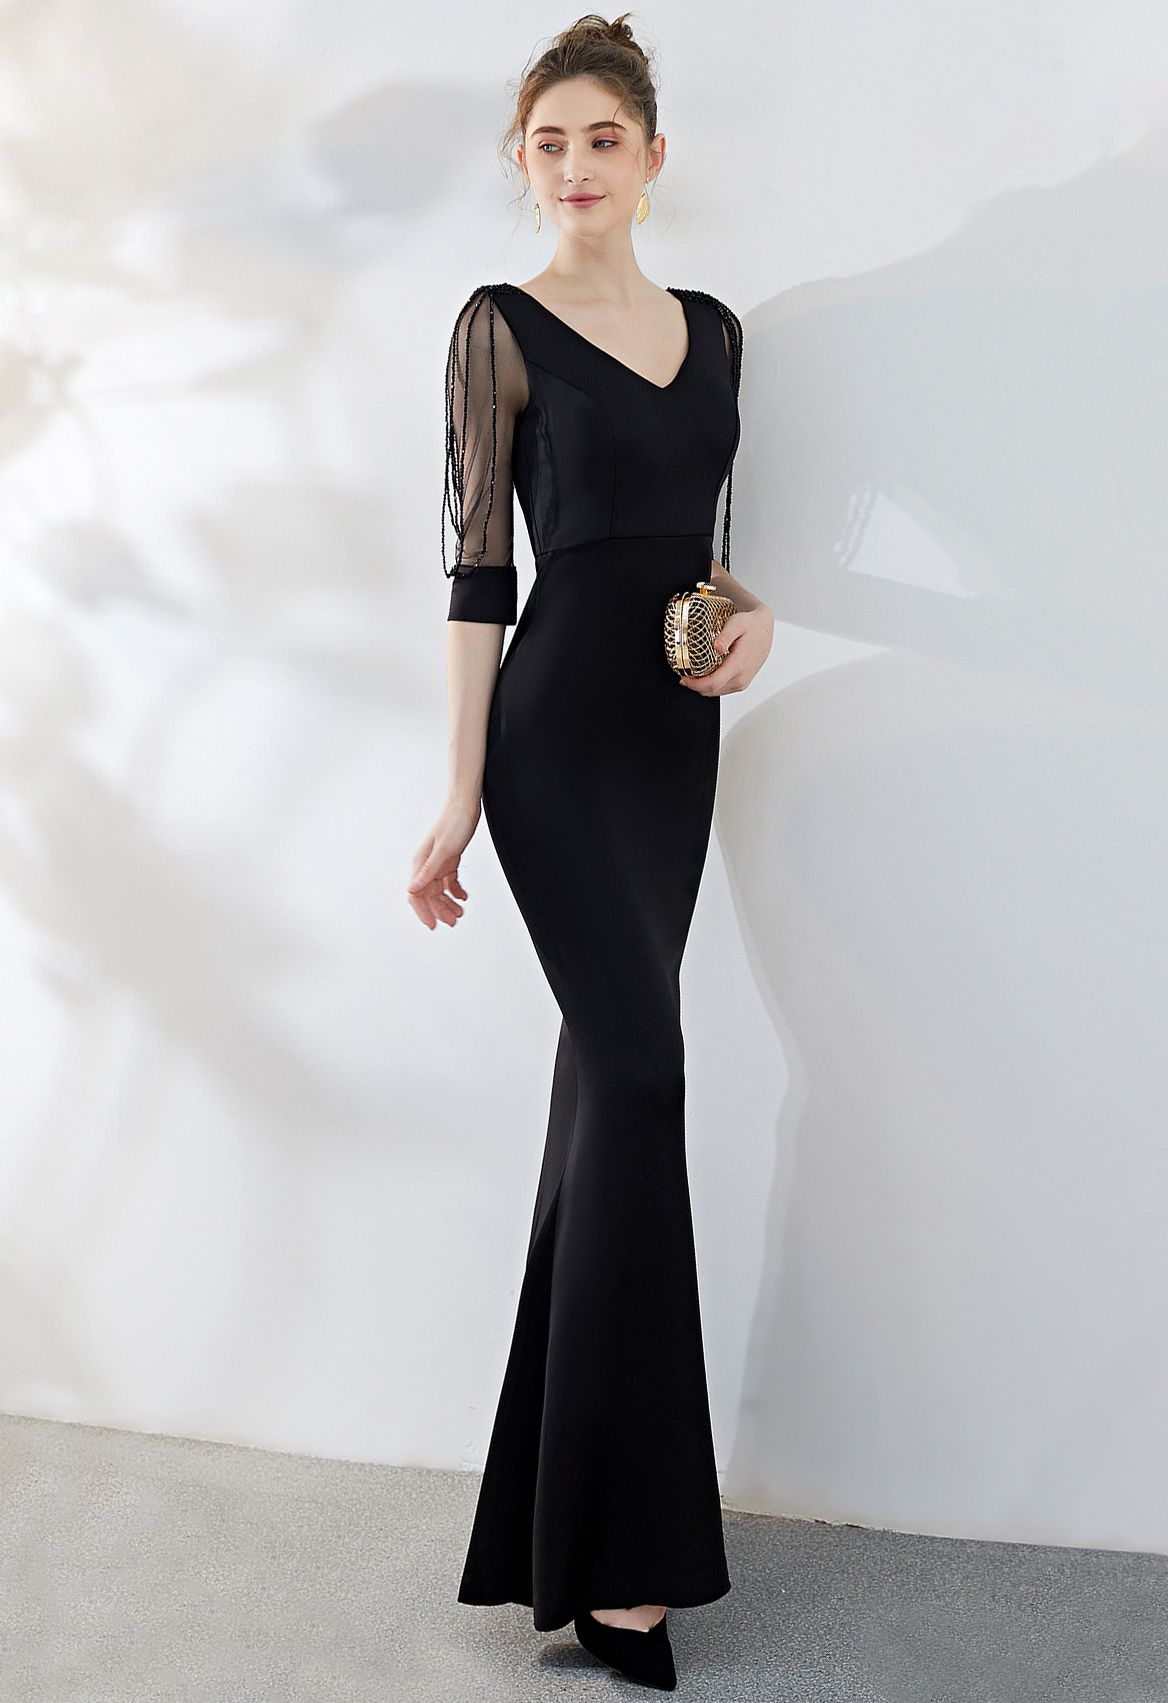 Draped Bead Mesh Sleeve Gown in Black - Retro, Indie and Unique Fashion